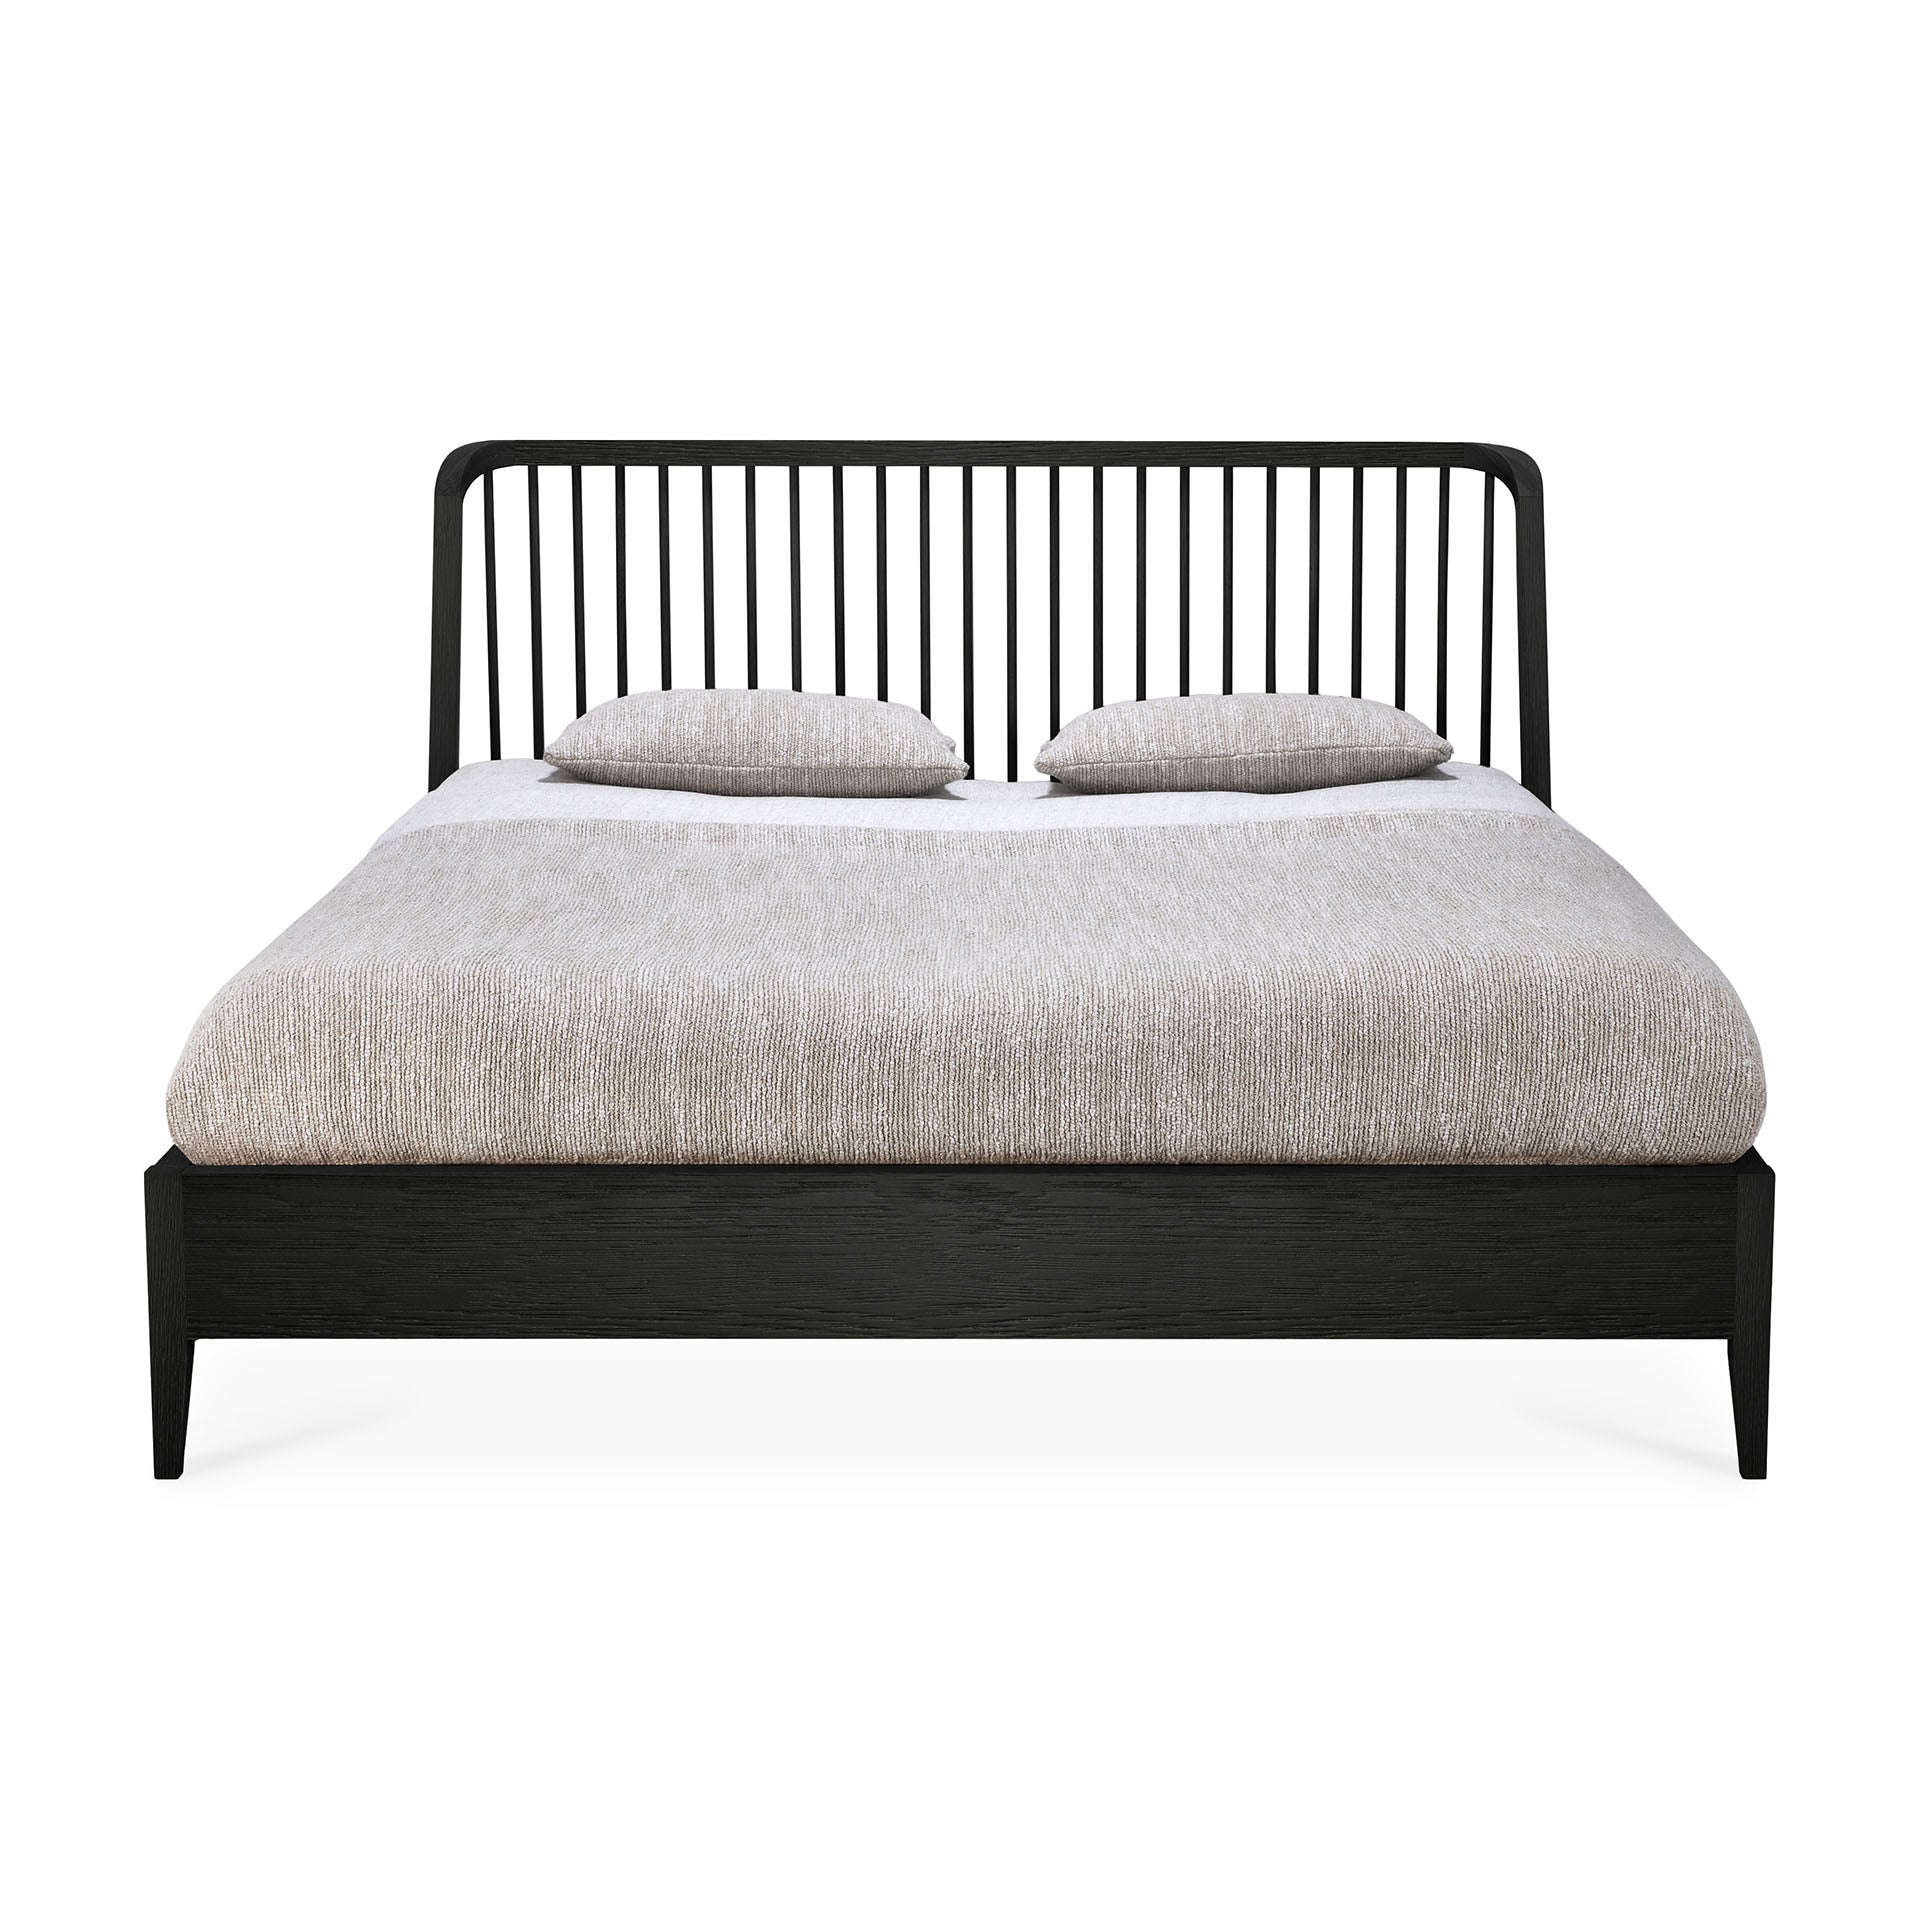 Ethnicraft Oak Black Spindle Bed is available from Make Your House A Home, Bendigo, Victoria, Australia